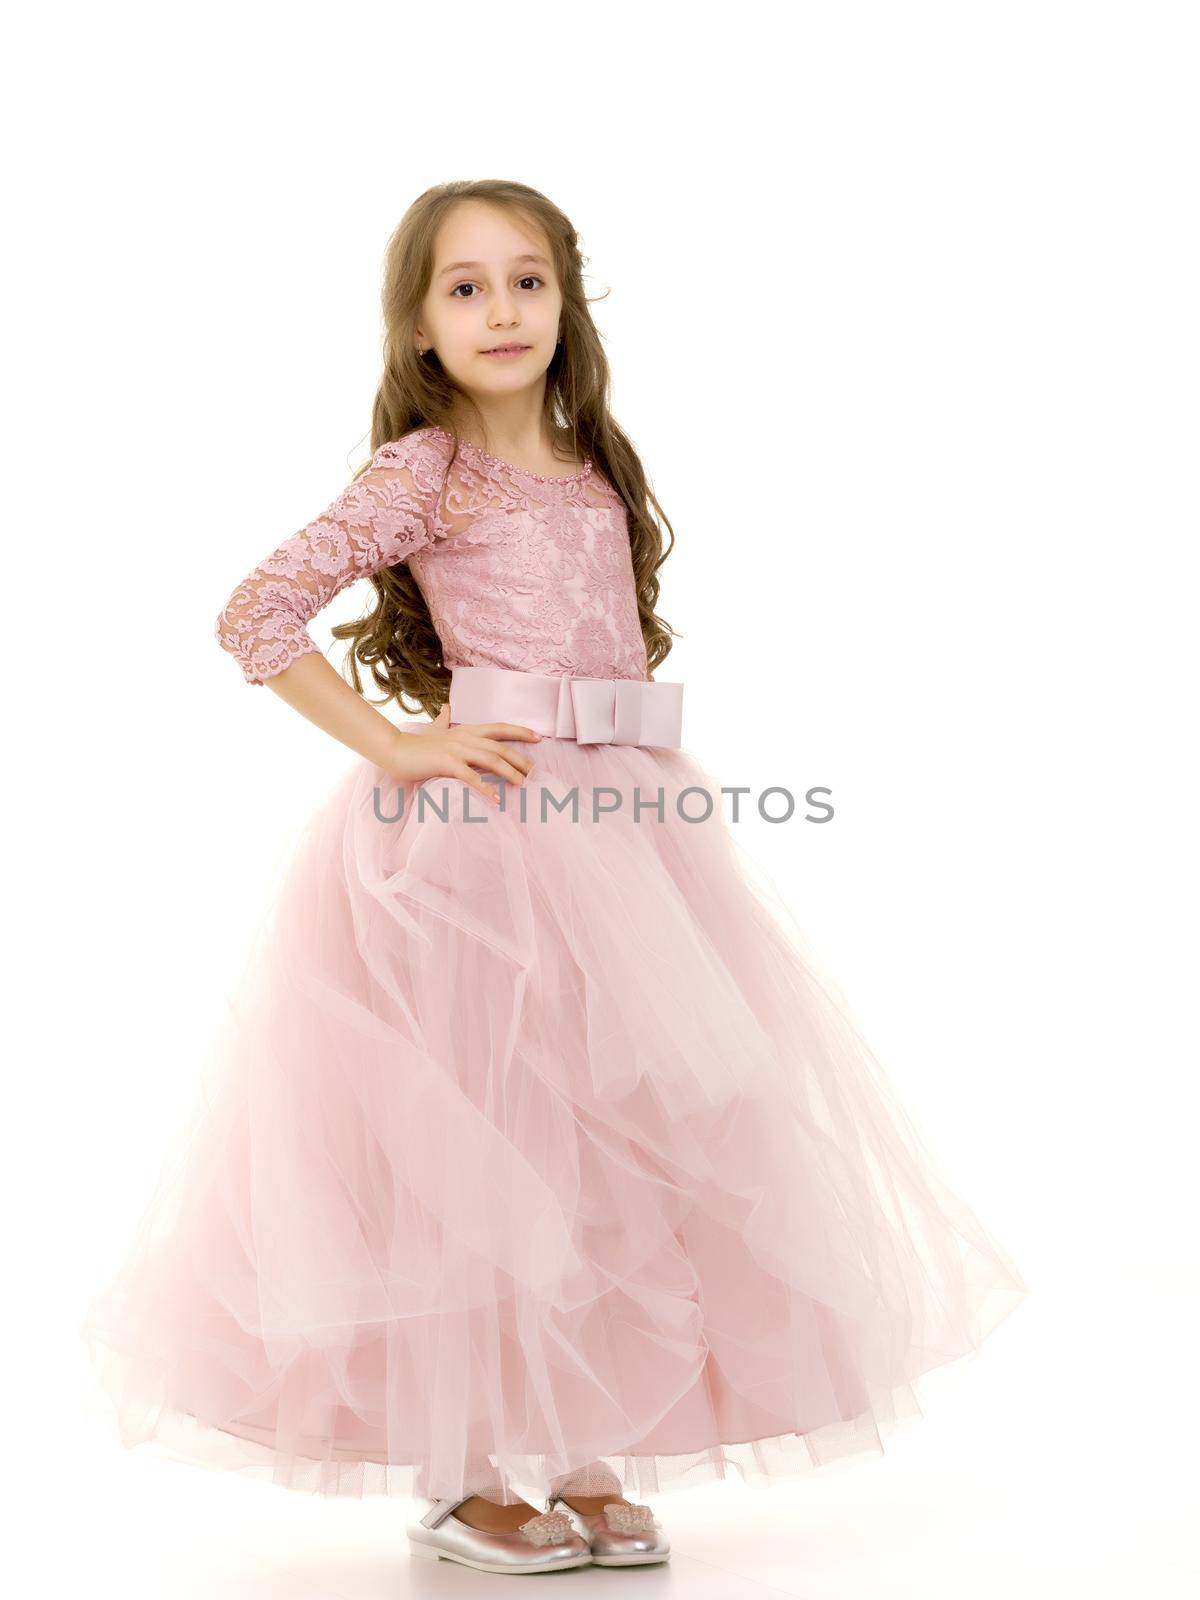 Full Length Portrait of Teen Girl Standing Half Turn, Beautiful Girl Wearing Dress Looking at Camera, Teenager in Stylish Clothes Posing in Studio Against White Background